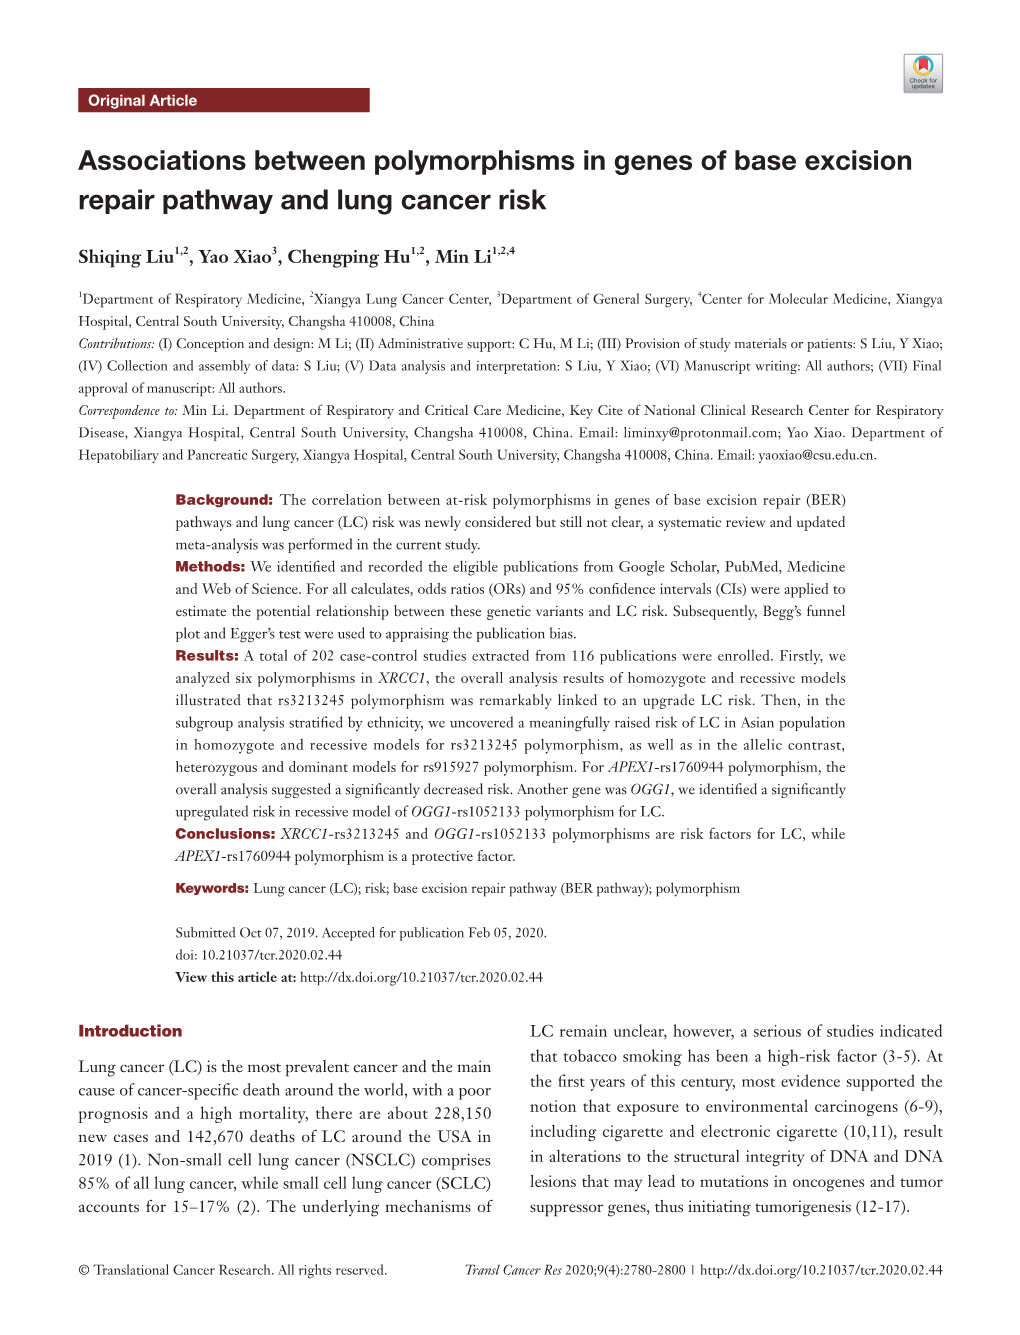 Associations Between Polymorphisms in Genes of Base Excision Repair Pathway and Lung Cancer Risk